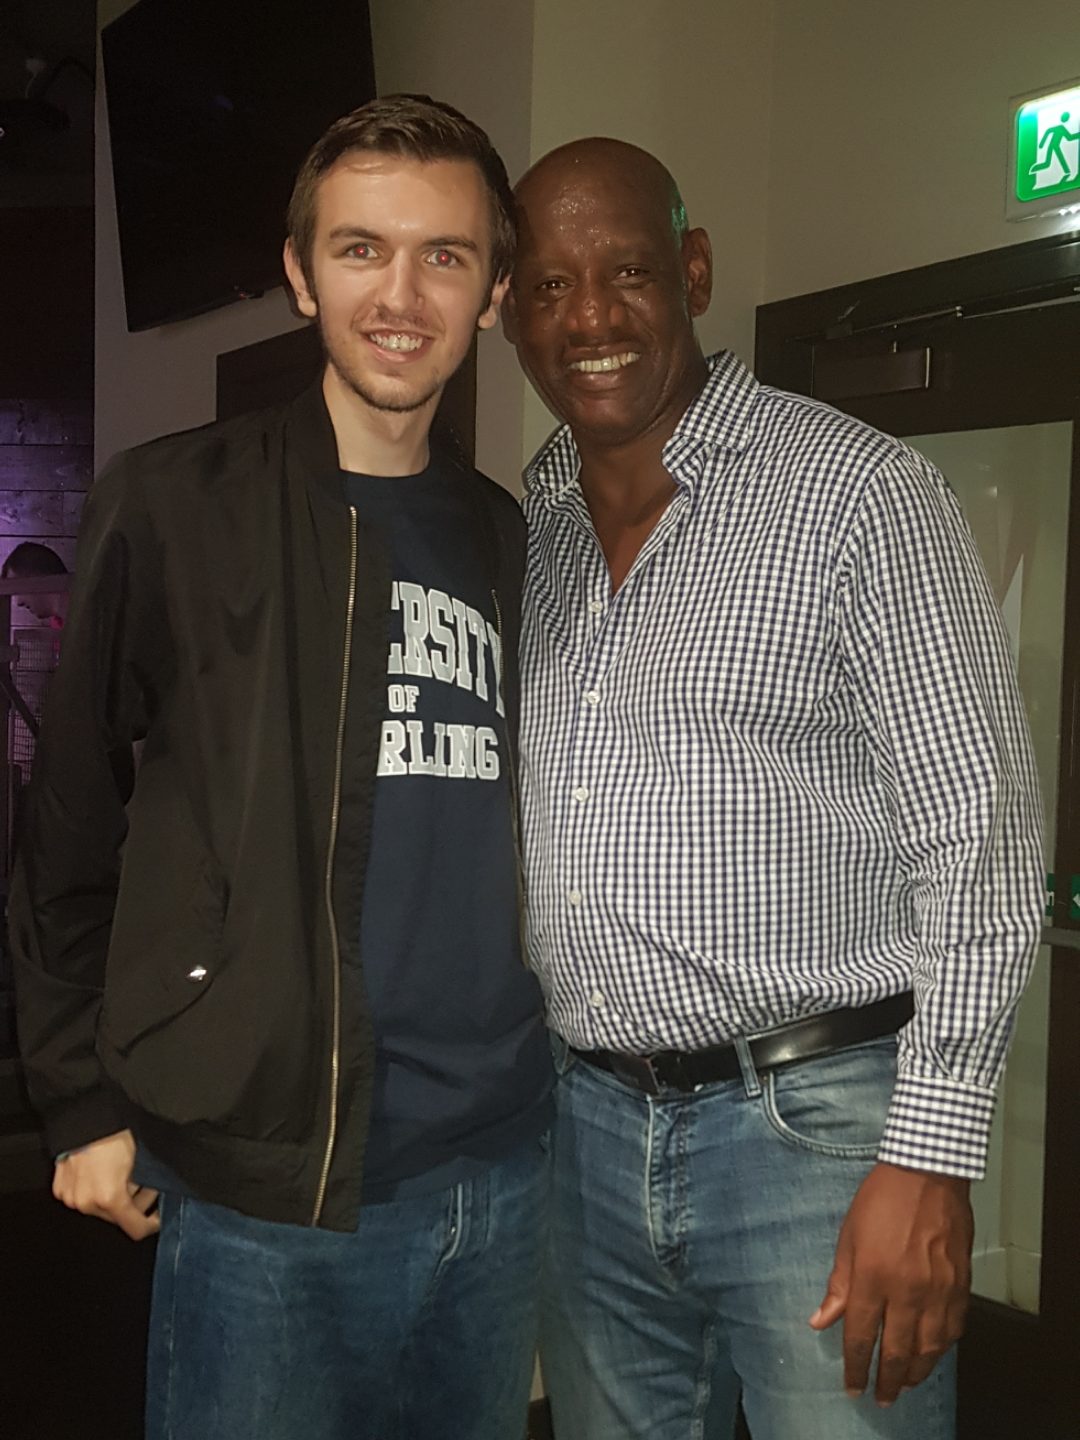 Luke Thomas smiling with Shaun Wallace from The Chase